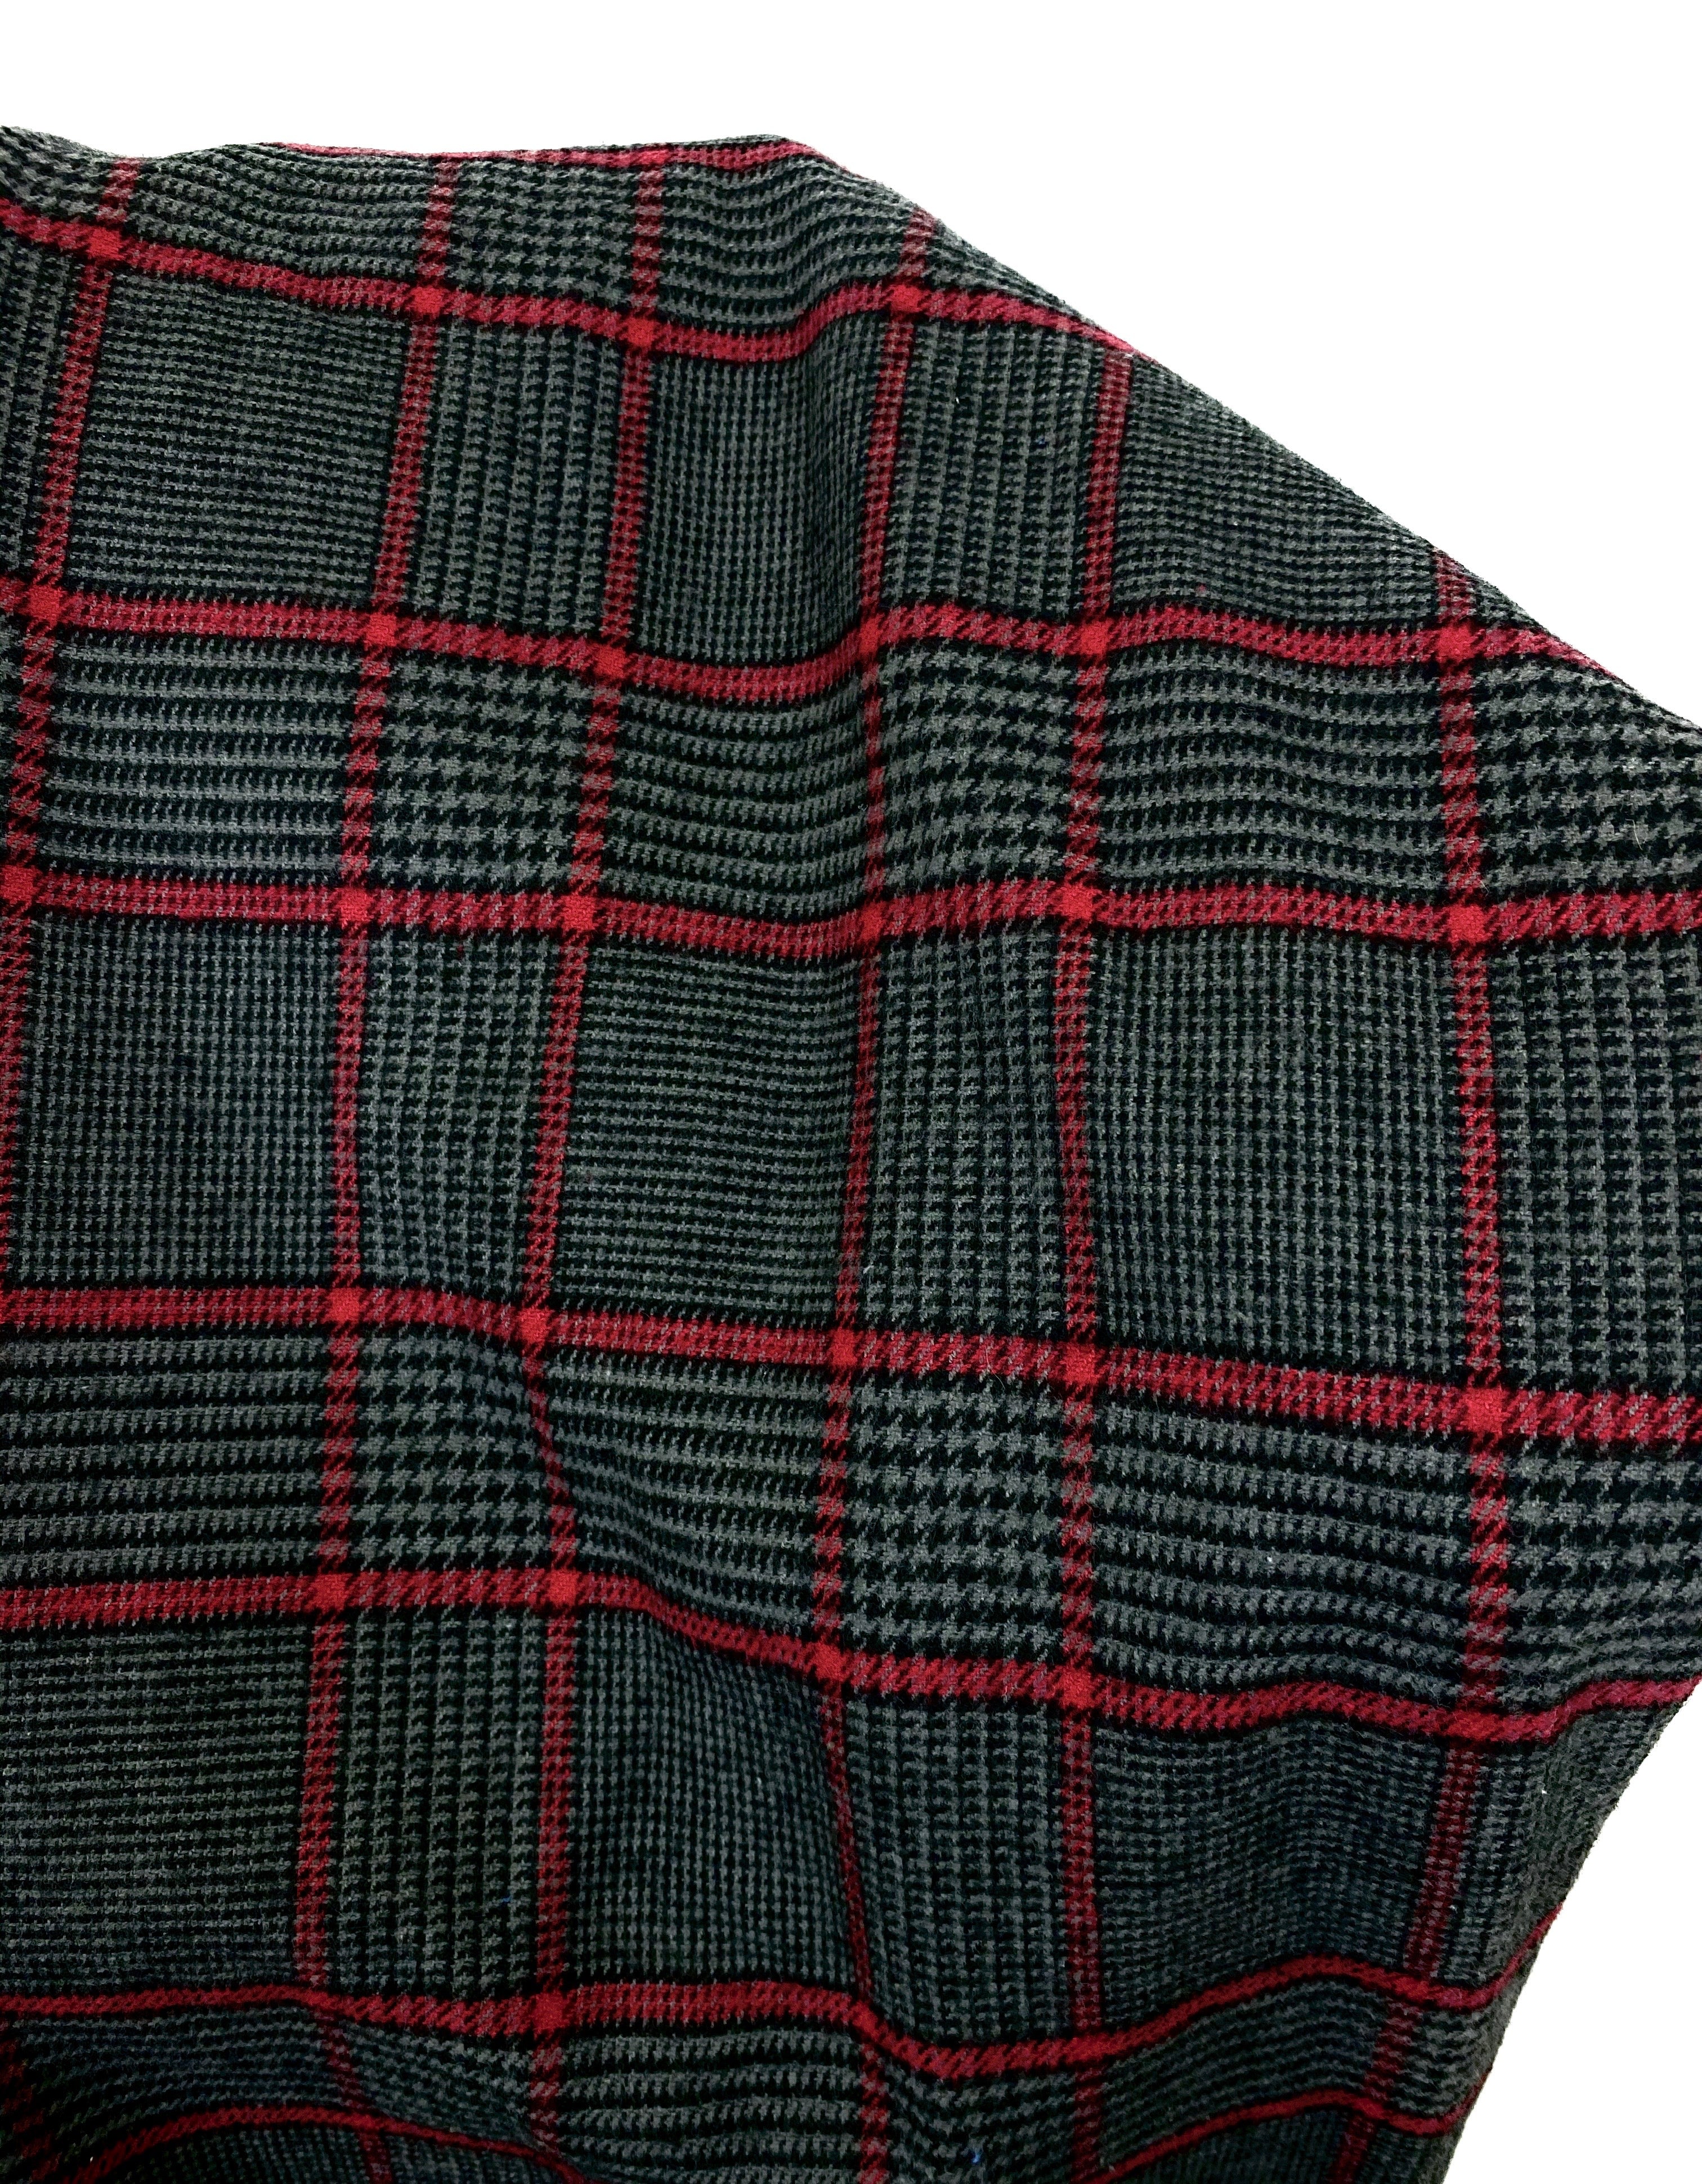 Dark Gray, Black, and Red Houndstooth Plaid Medium Weight Flannel Scarf